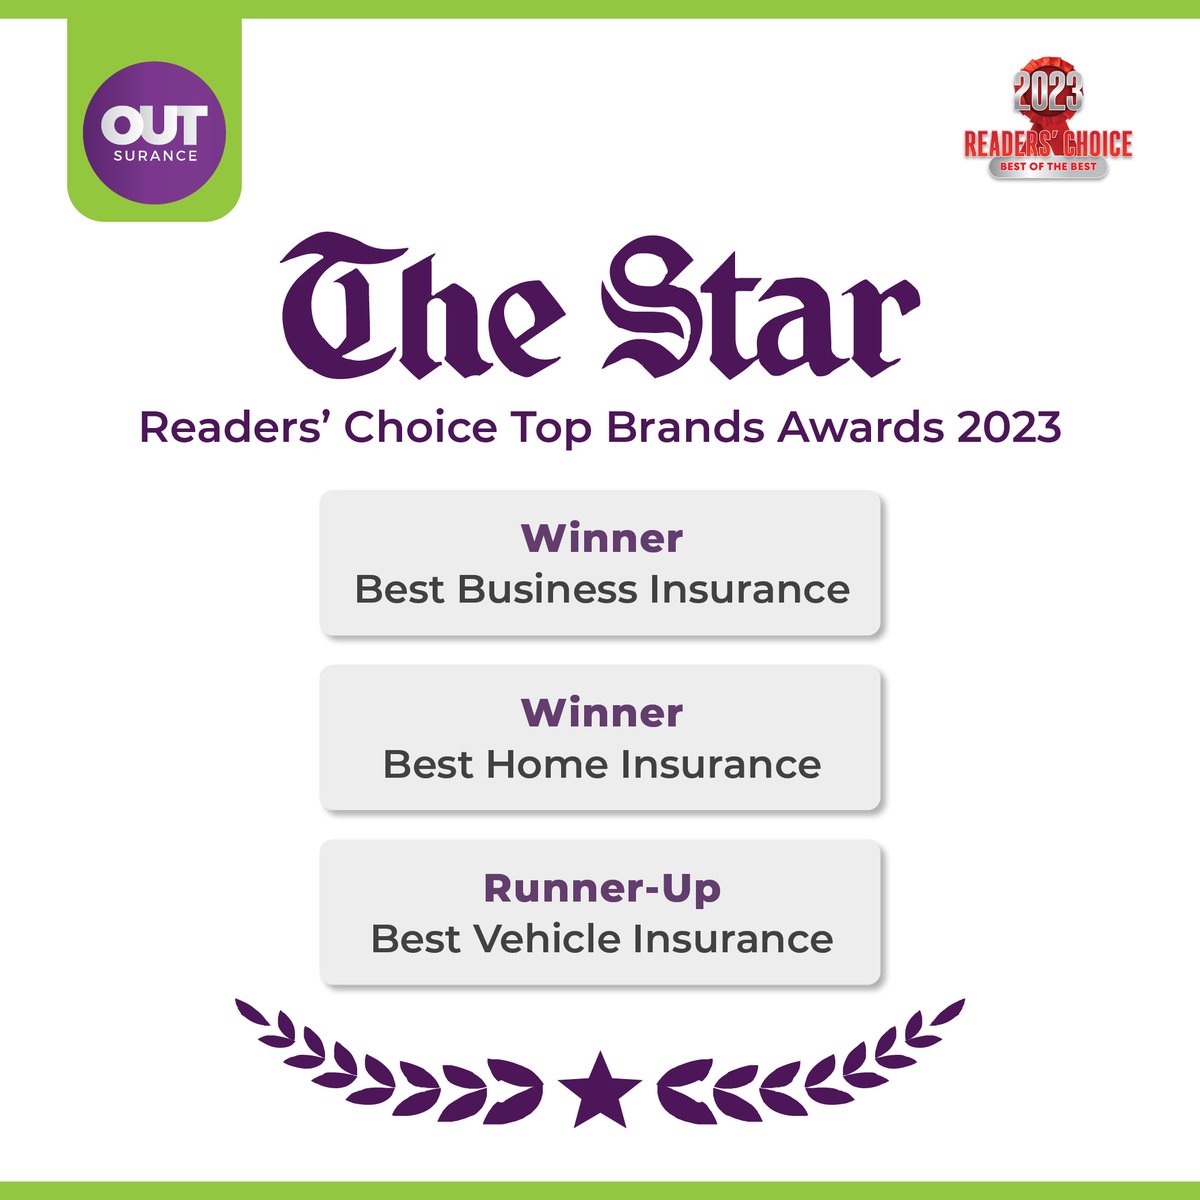 We’re thrilled to share that OUTsurance has been voted as the Best Home and Business Insurance Company in the 2023 Star Readers’ Choice Awards! Click here bit.ly/4a7IjFM for more.
#ReadersChoiceAwards